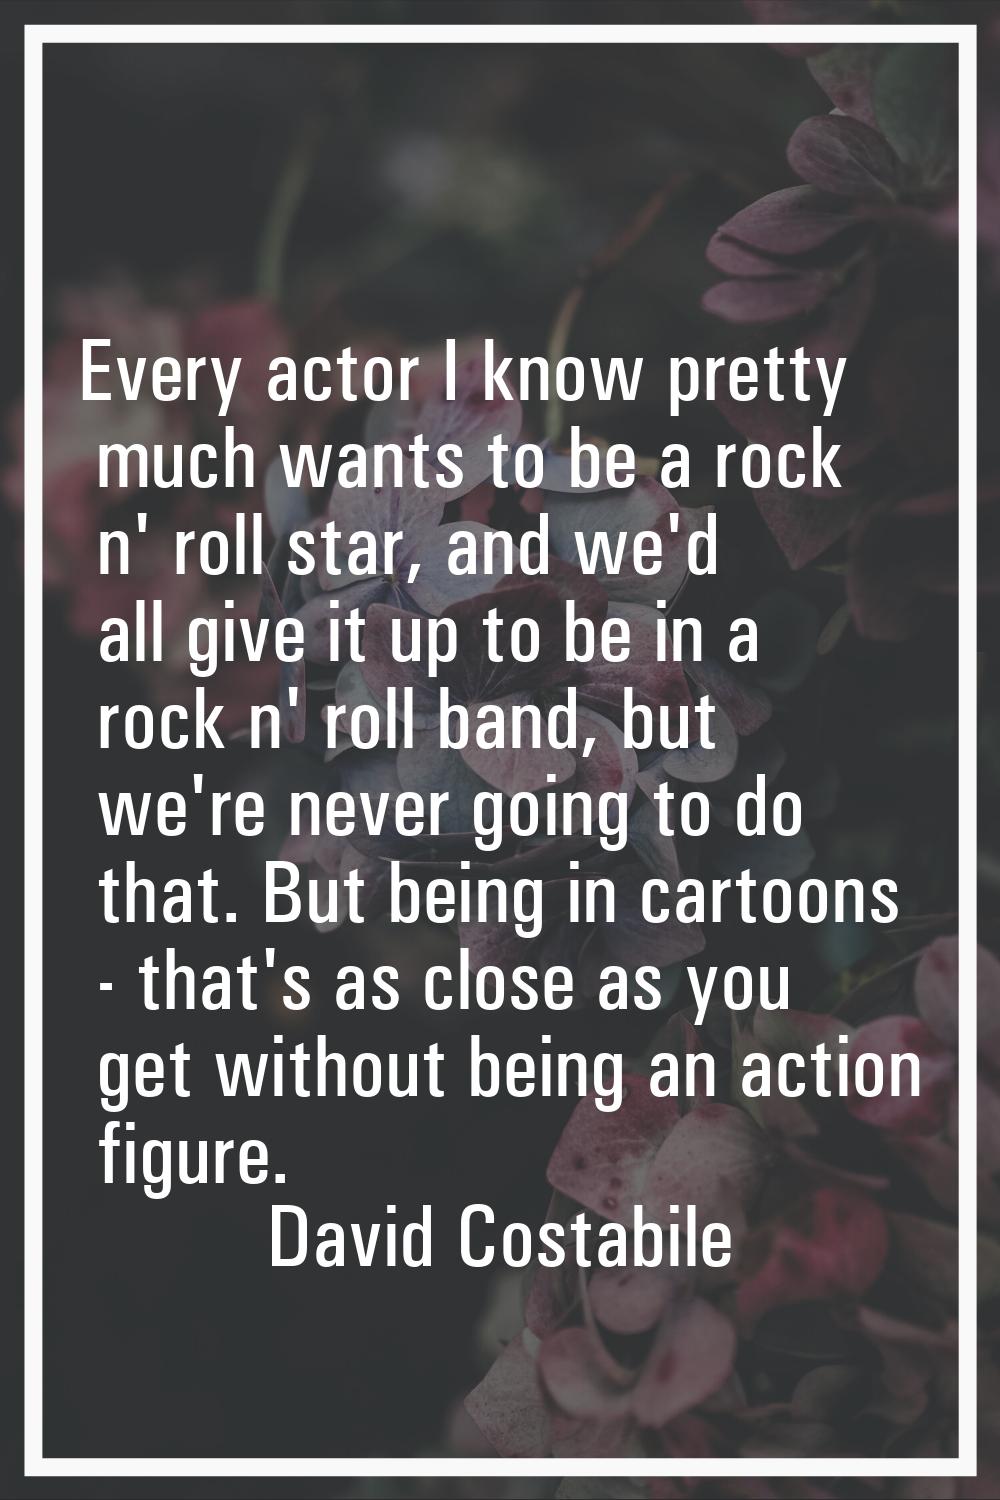 Every actor I know pretty much wants to be a rock n' roll star, and we'd all give it up to be in a 